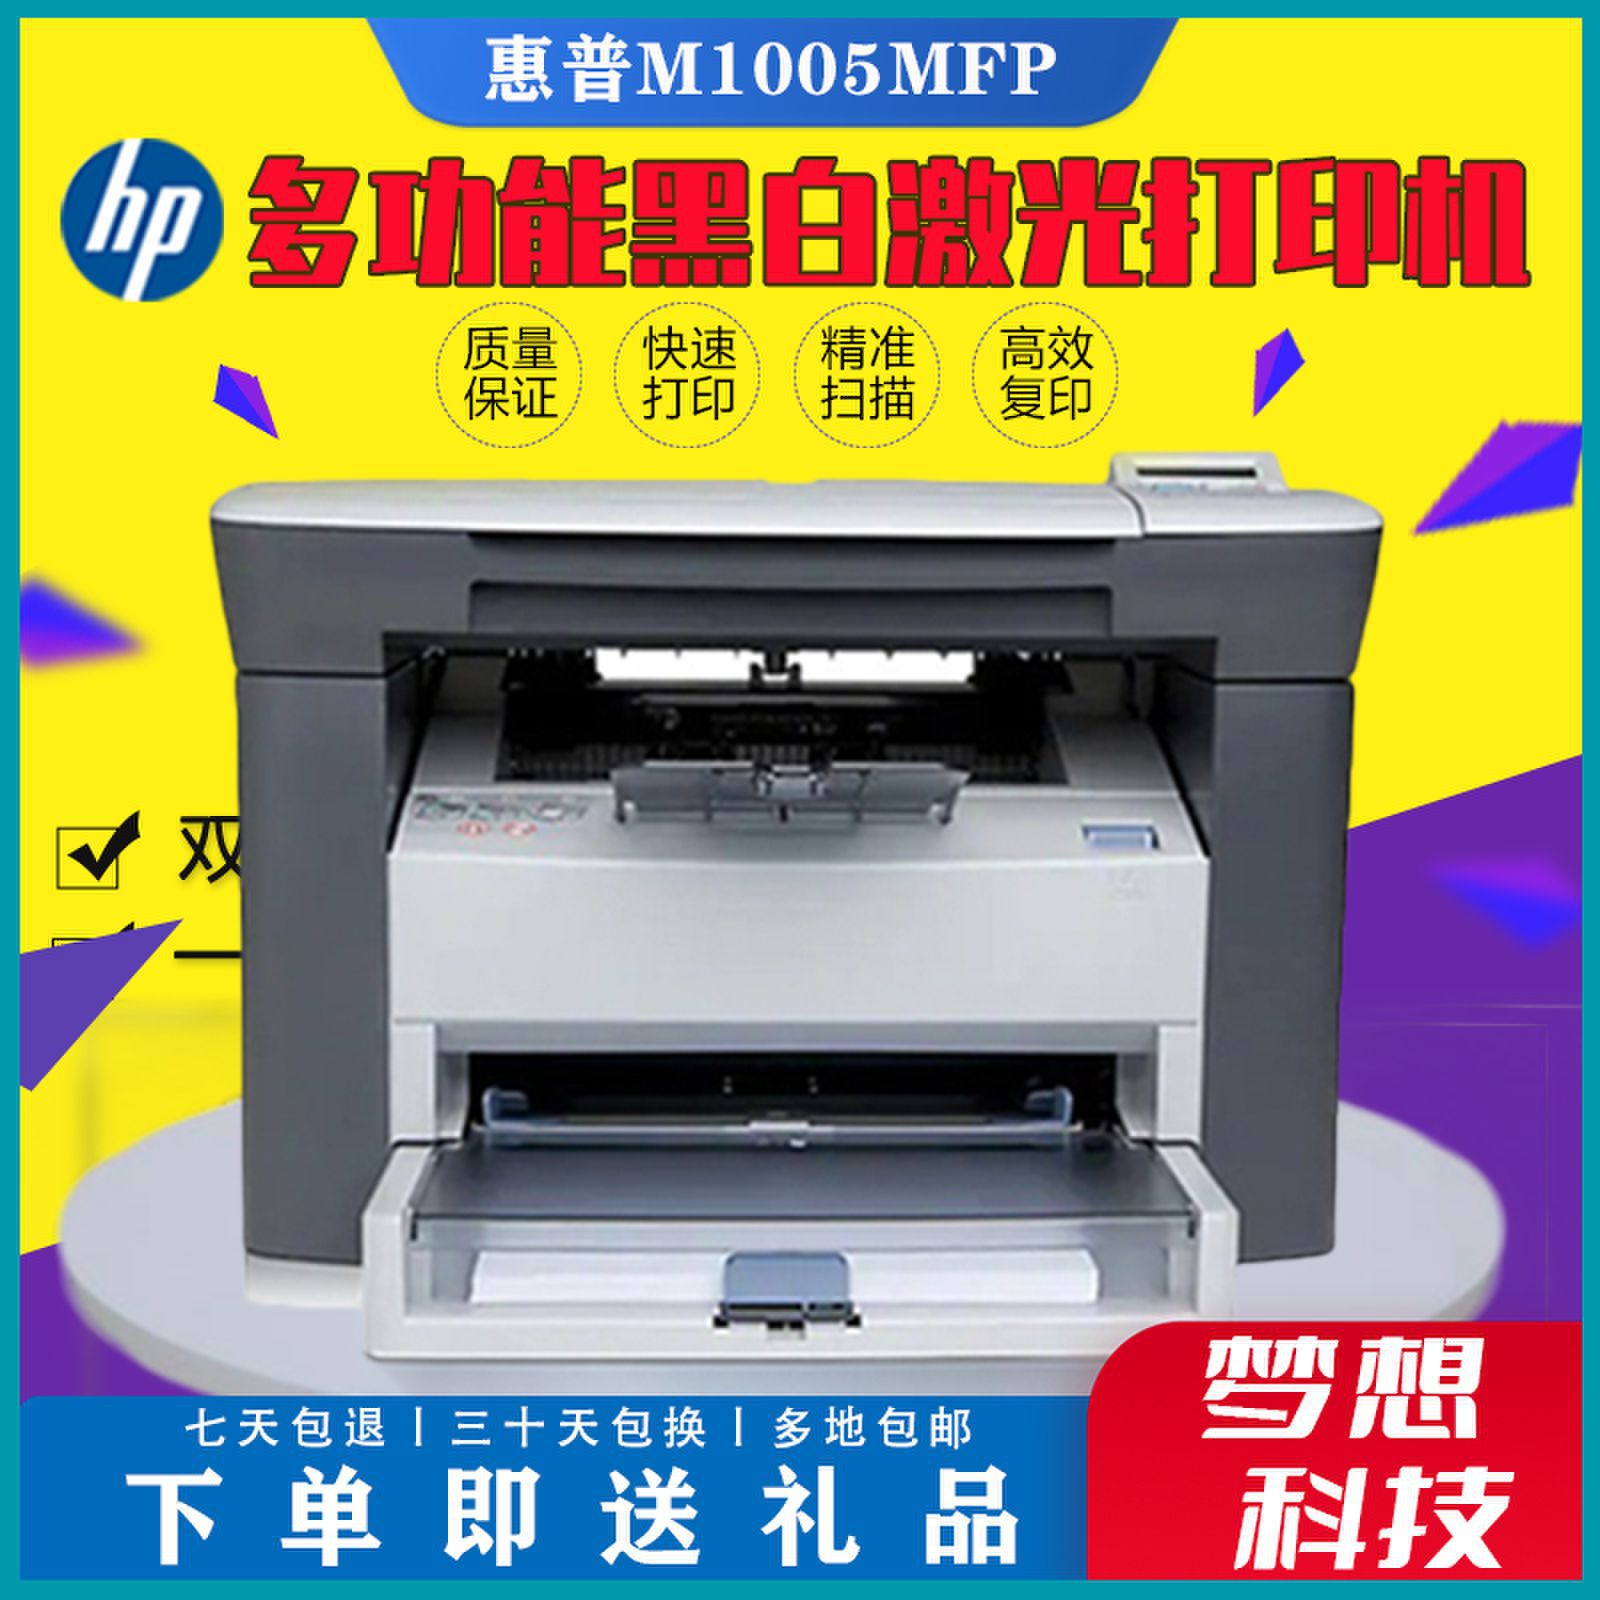 HP/ HP M1005 Monochrome Laser Printer to work in an office A4 Printing Copy scanning Triple household Integrated machine